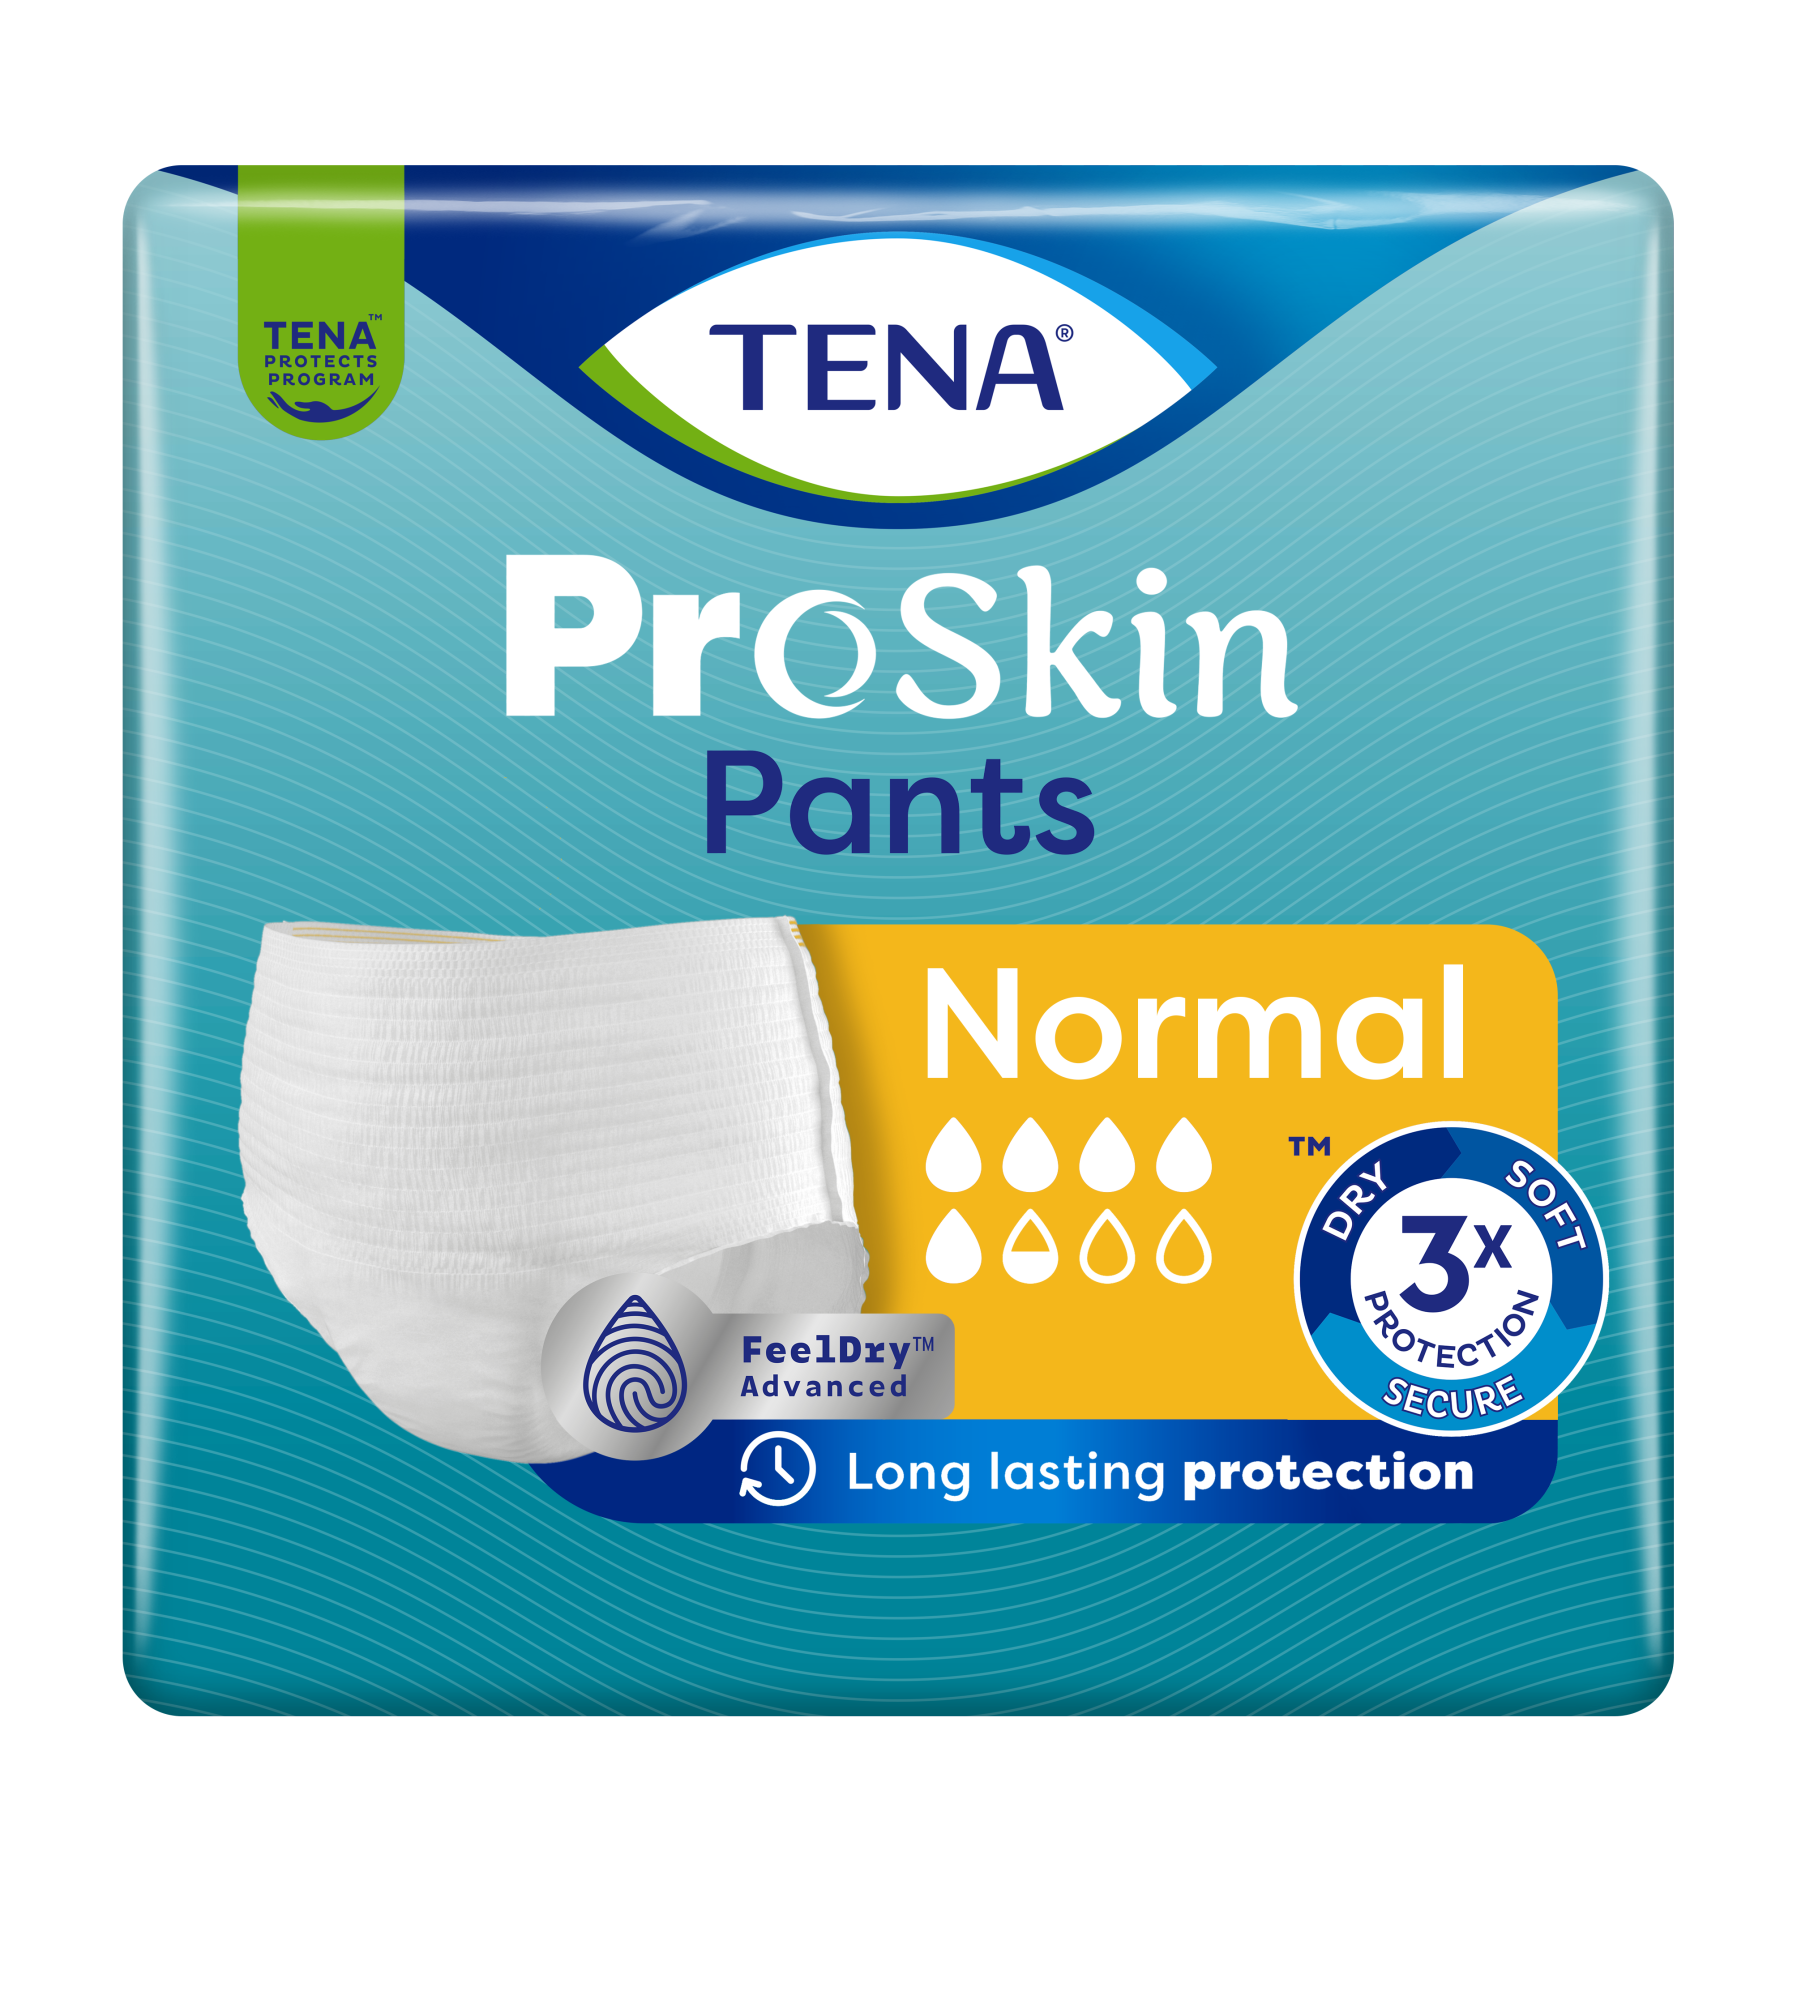 Incontinence Pants Adult Nappies Diaper for Heavy Bladder Weakness Sana  Medium